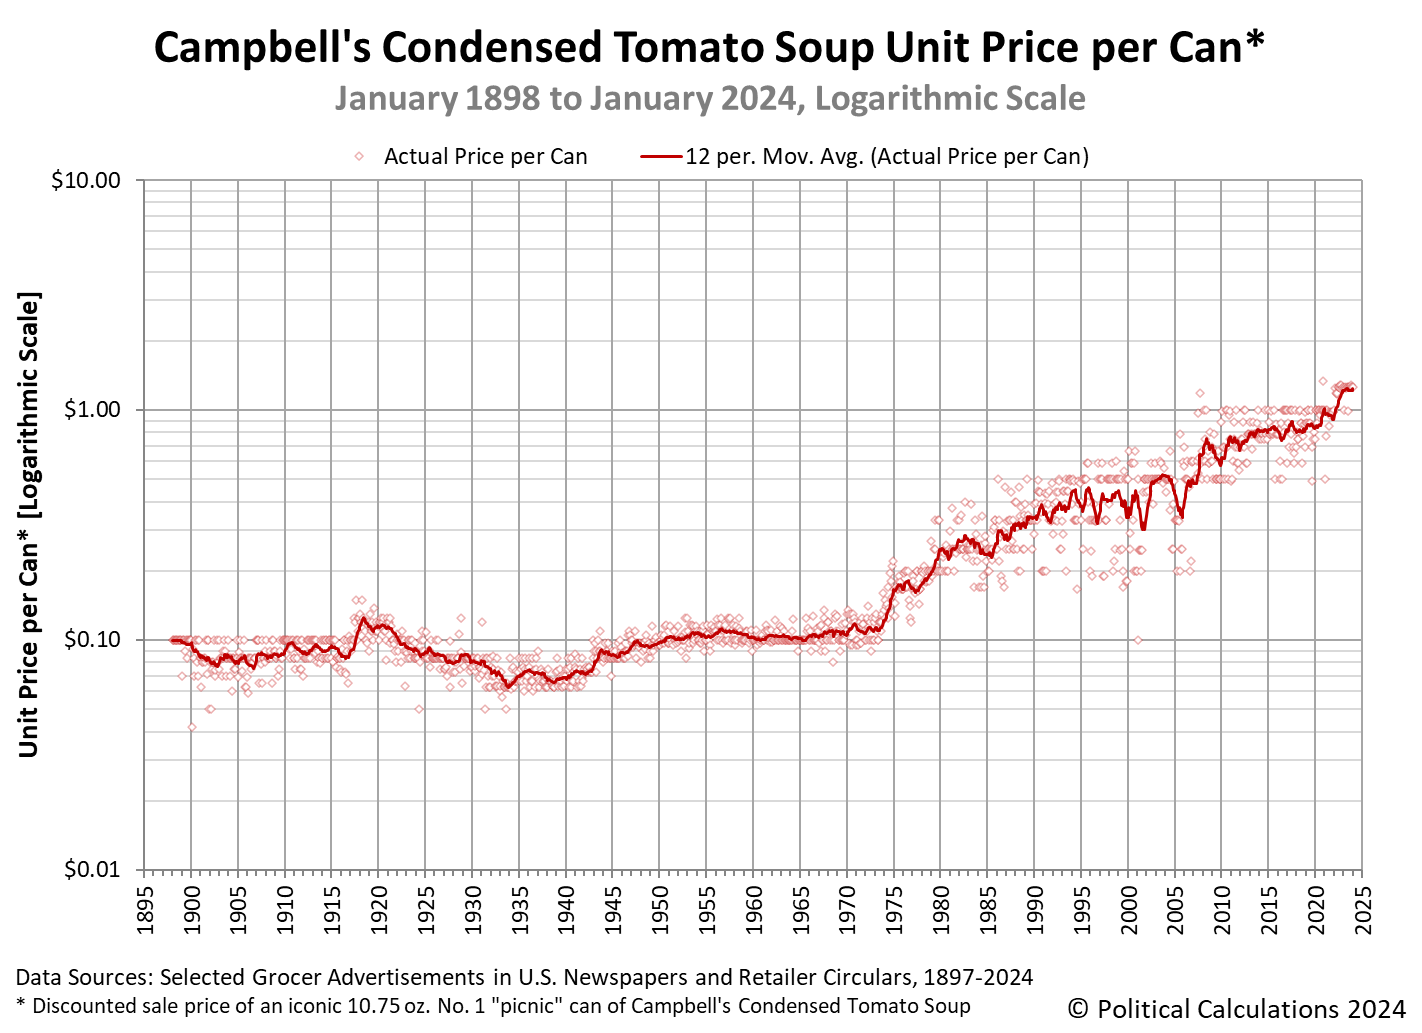 Campbell's Condensed Tomato Soup Unit Price per Can, January 1898 - January 2024 (Logarithmic Scale)